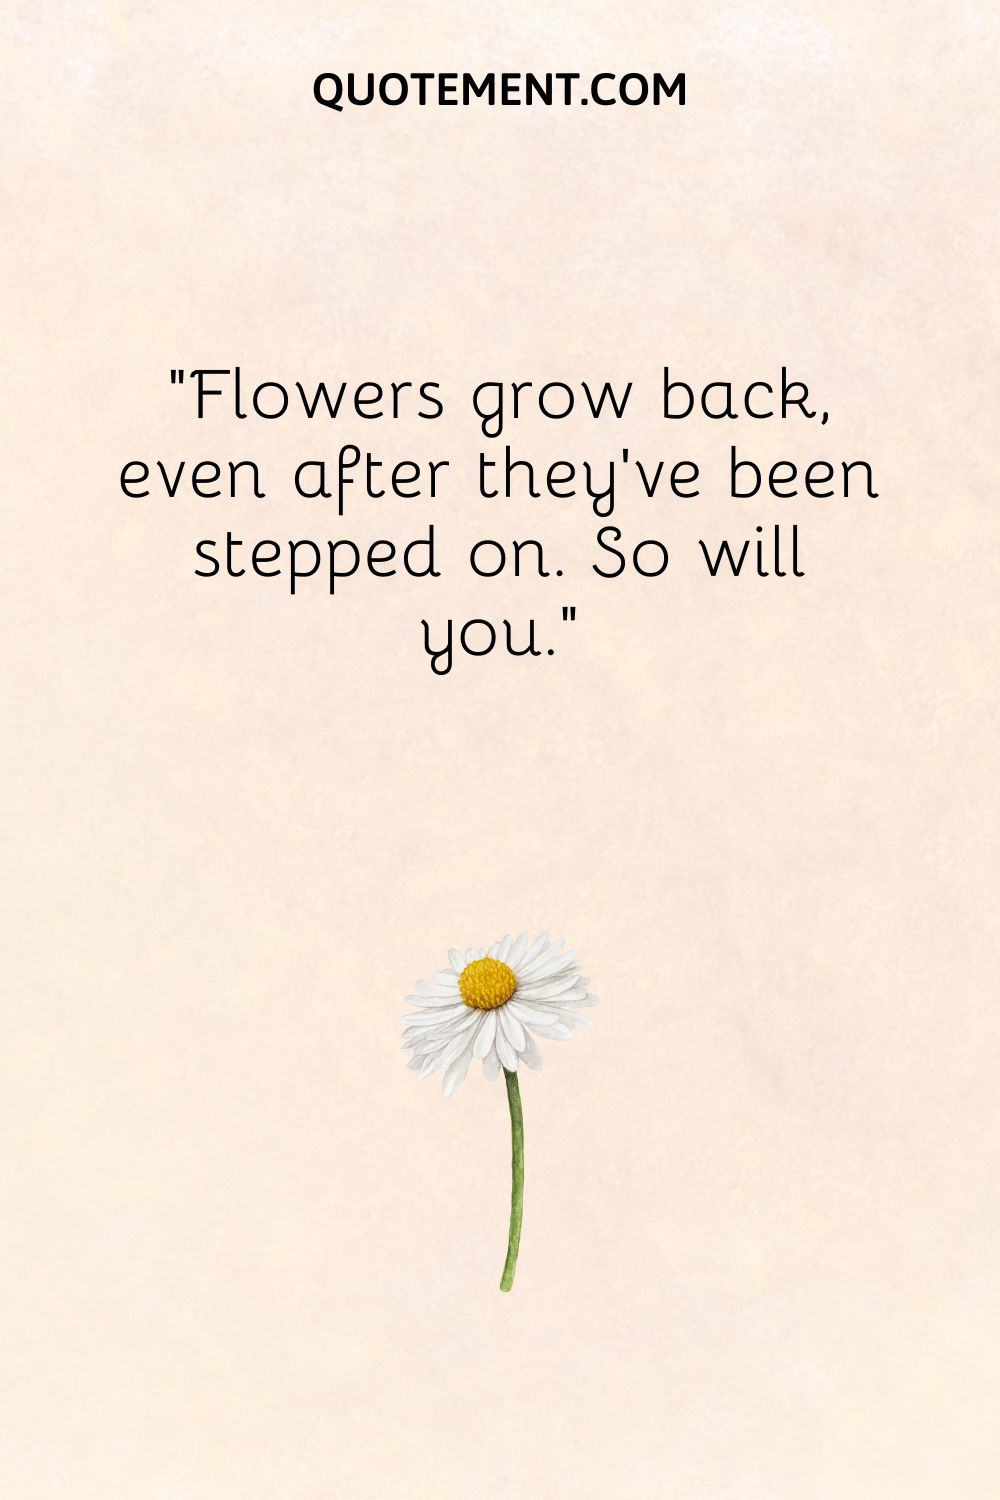 Flowers grow back, even after they’ve been stepped on